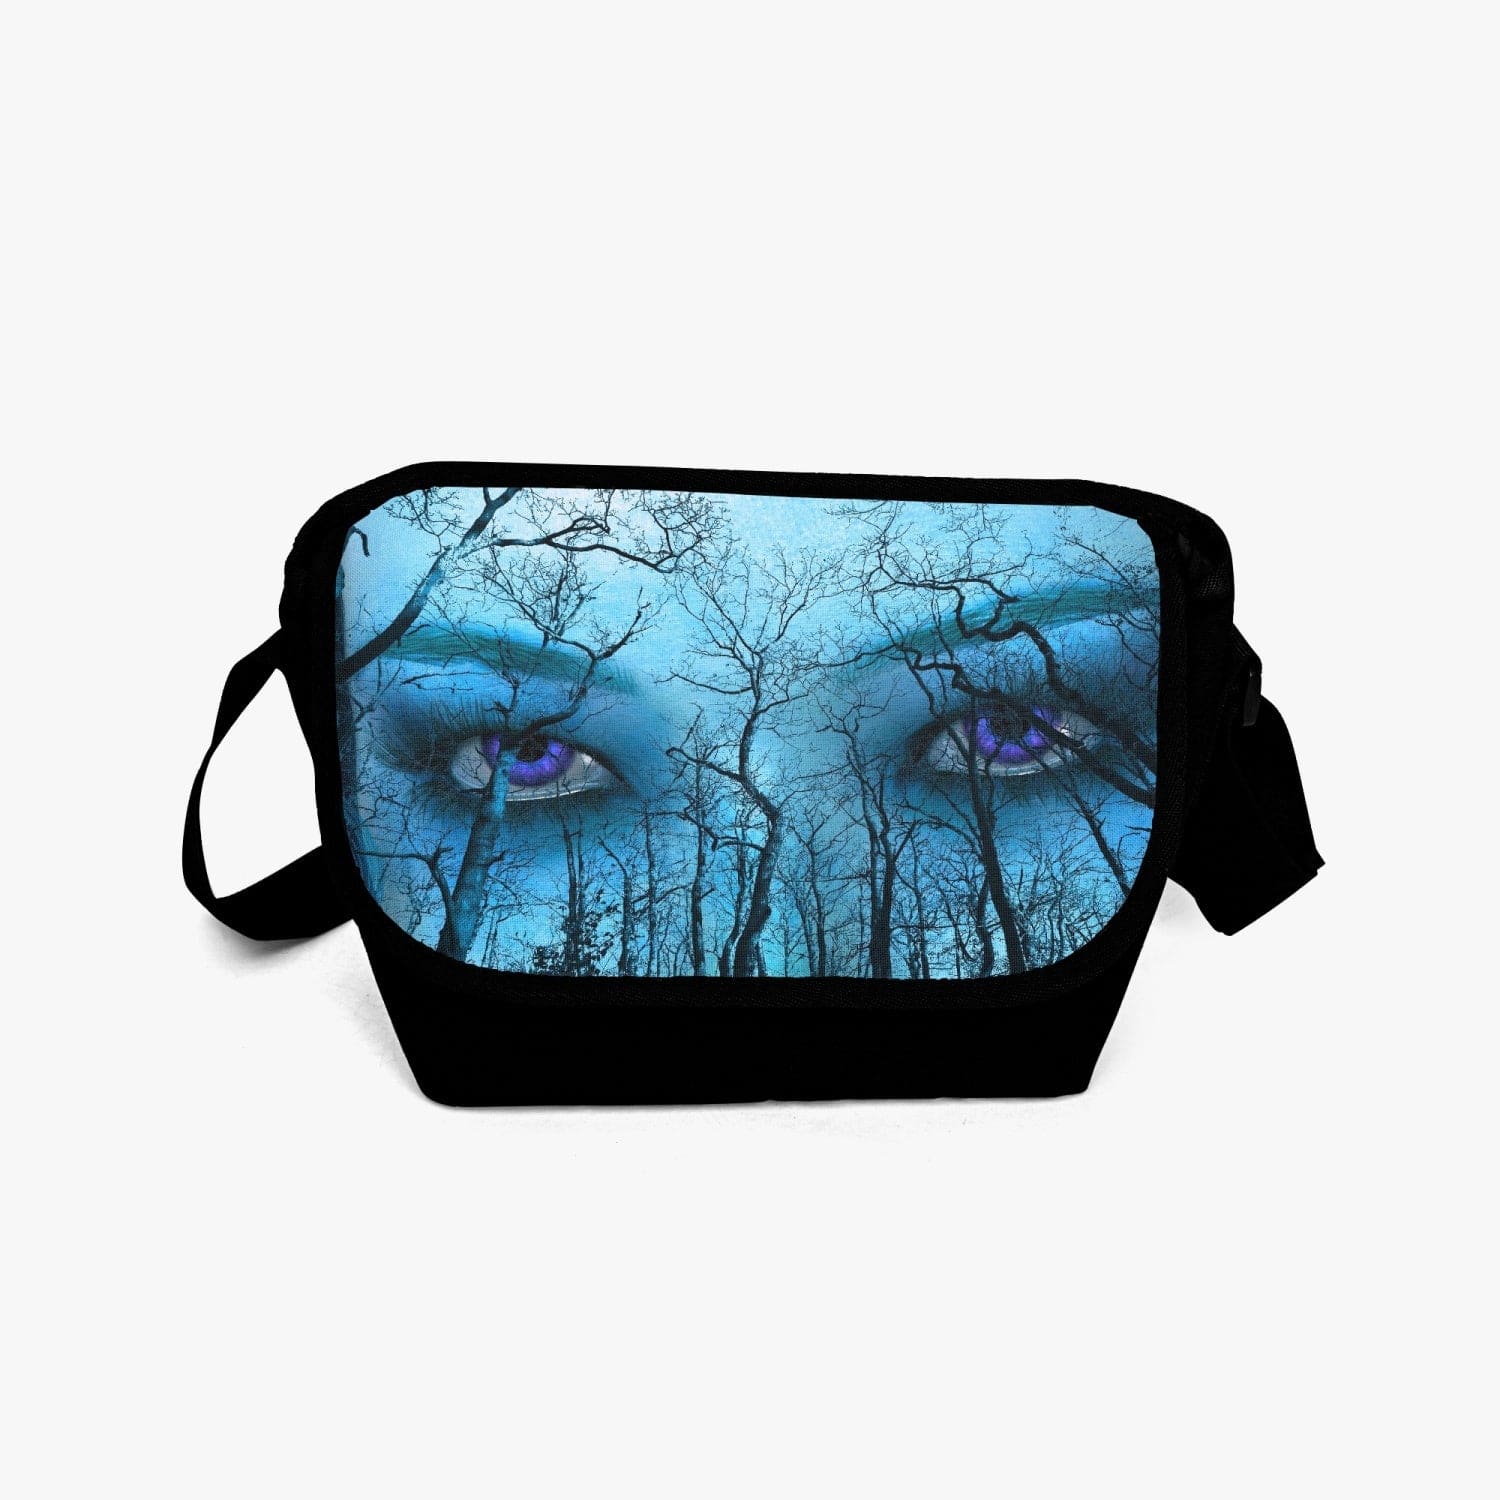 Piercing purple eyes feature on a forest themed print on this canvas messenger bag at Gallery Serpentine.  Blue and aqua tones give this a supernatural feel.